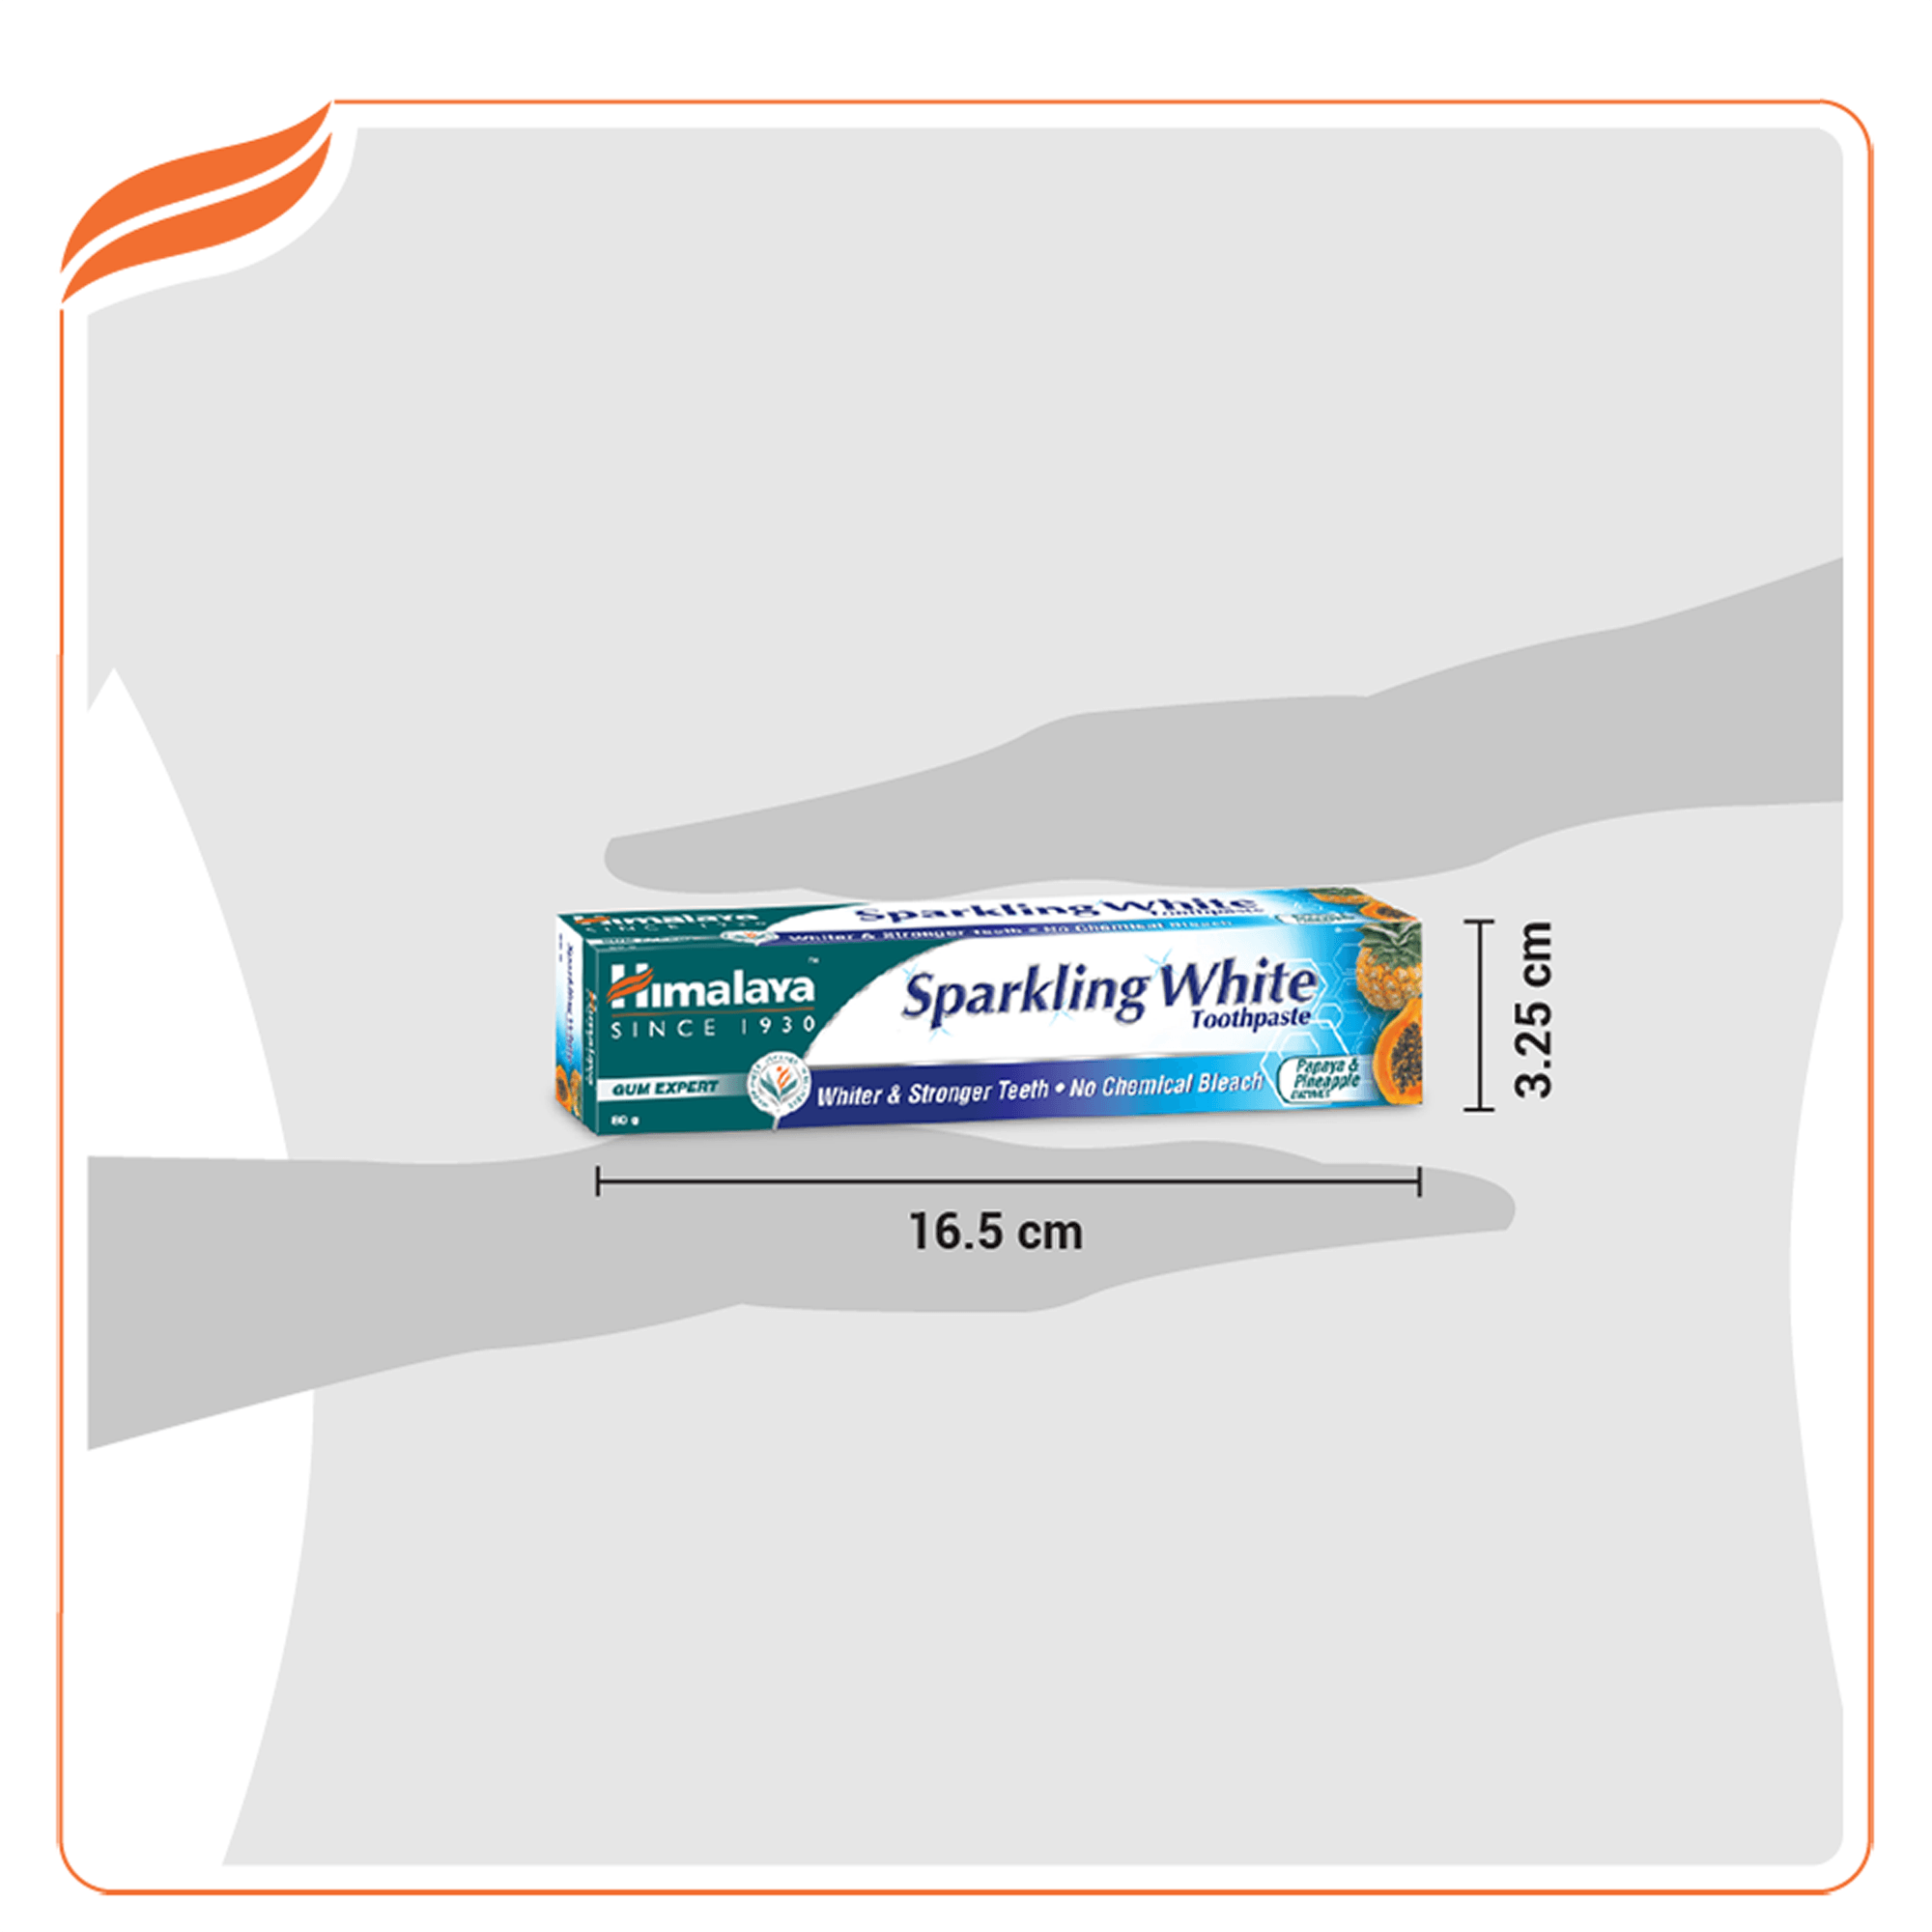 Himalaya Sparkling White Toothpaste - Pack Size